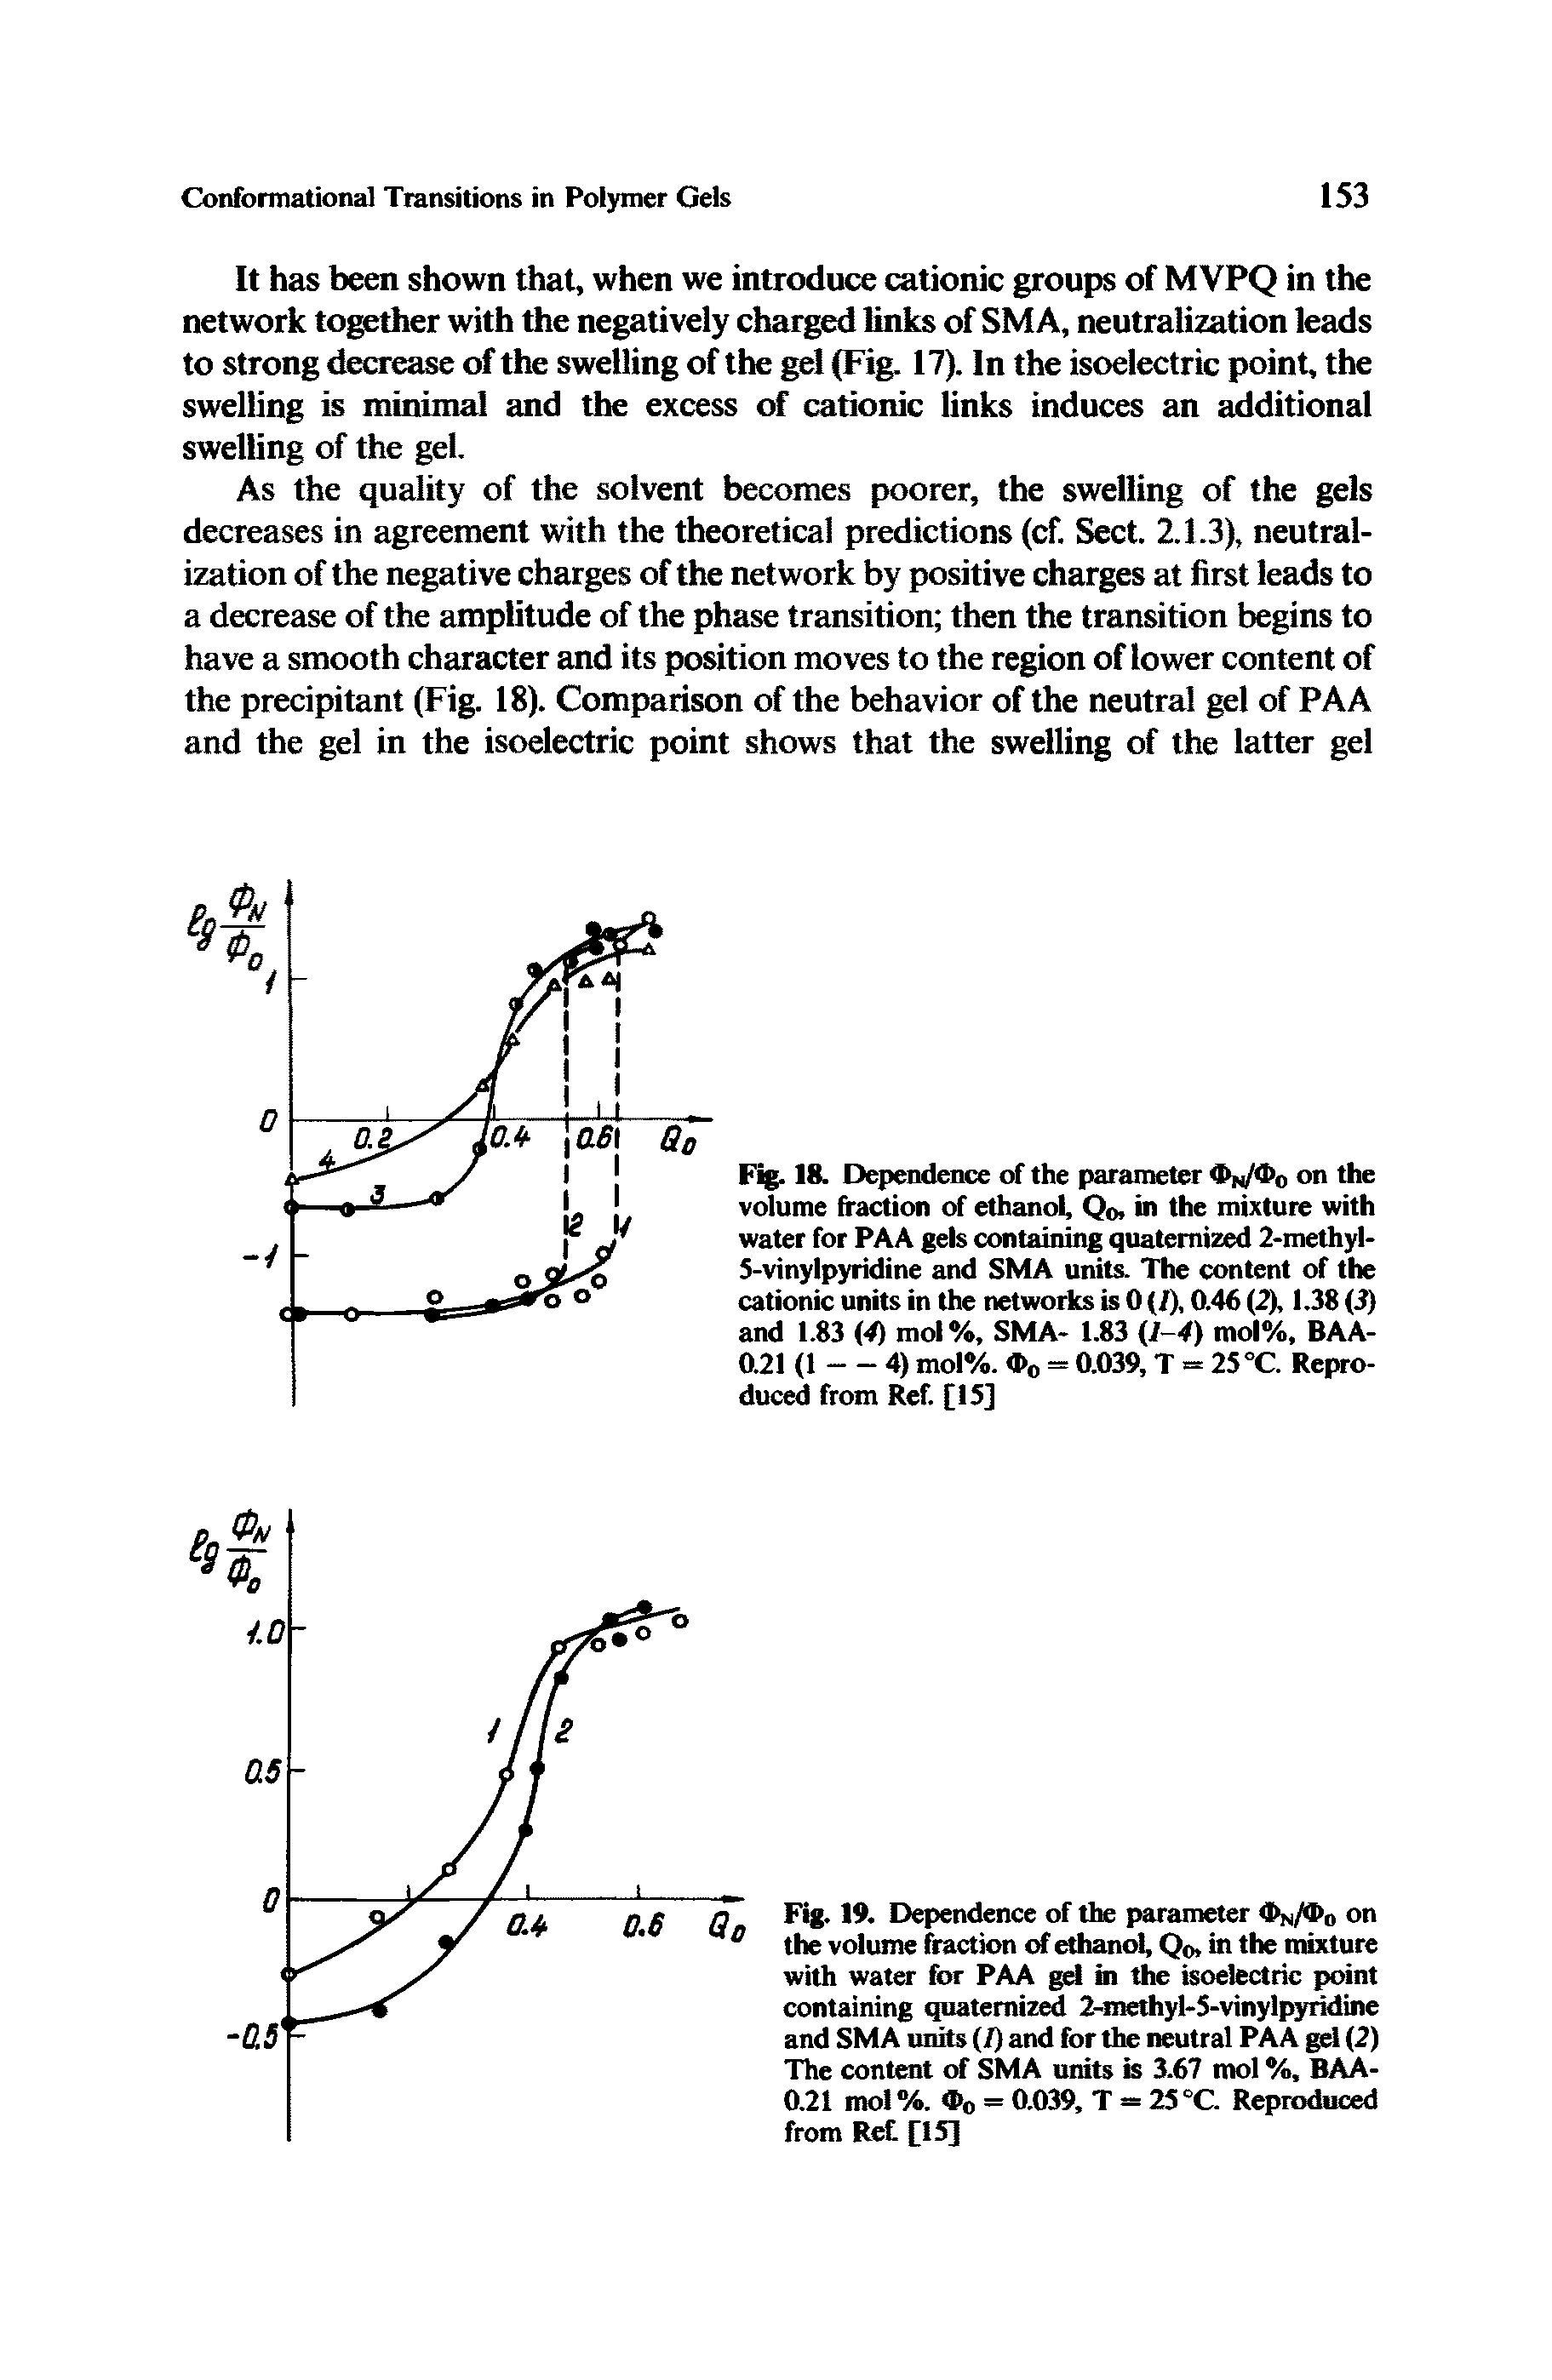 Fig. 19. Dependence of the parameter m/ 0 on the volume fraction of ethanol, Qo, in the mixture with water for PAA gel in the isoelectric point containing quatemized 2-methyl-5-vinylpyridine and SMA units (I) and for the neutral PAA gel (2) The content of SMA units is 3.67 mol %, BAA-0.21 mol %. 4>0 = 0.039, T = 25 °C. Reproduced from Ret [15]...